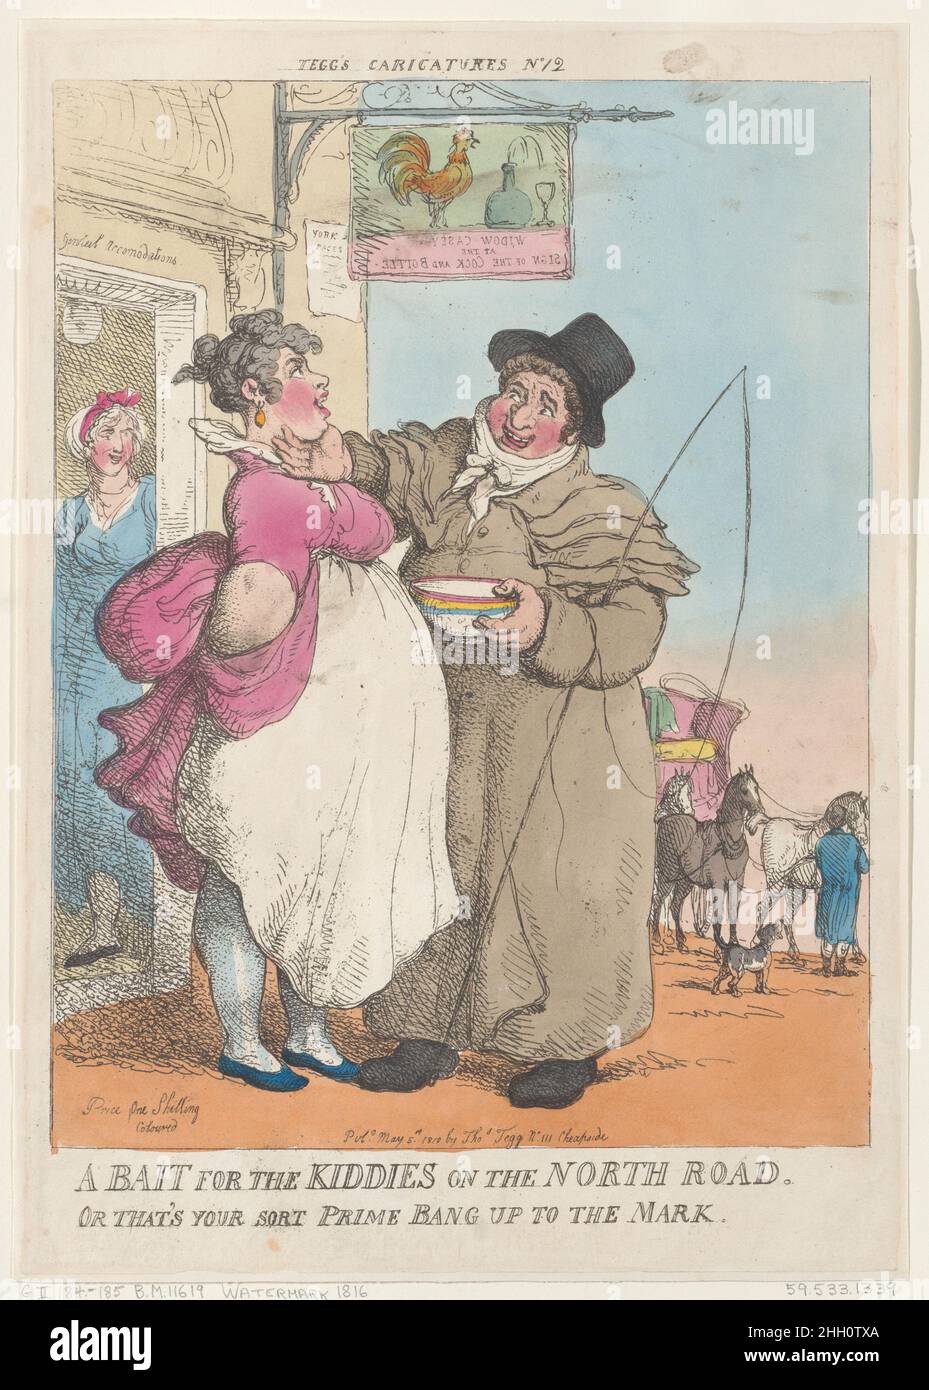 A Bait for Kiddies on the North Road. Or That's Your Sort Prime Bang up the Mark [May 5, 1810], reprint Thomas Rowlandson A stout stage-coachman holds a bowl and stands by the door of an inn, holding the chin of the landlady.. A Bait for Kiddies on the North Road. Or That's Your Sort Prime Bang up the Mark. Thomas Rowlandson (British, London 1757–1827 London). [May 5, 1810], reprint. Hand-colored etching. Thomas Tegg (British, 1776–1846). Prints Stock Photo